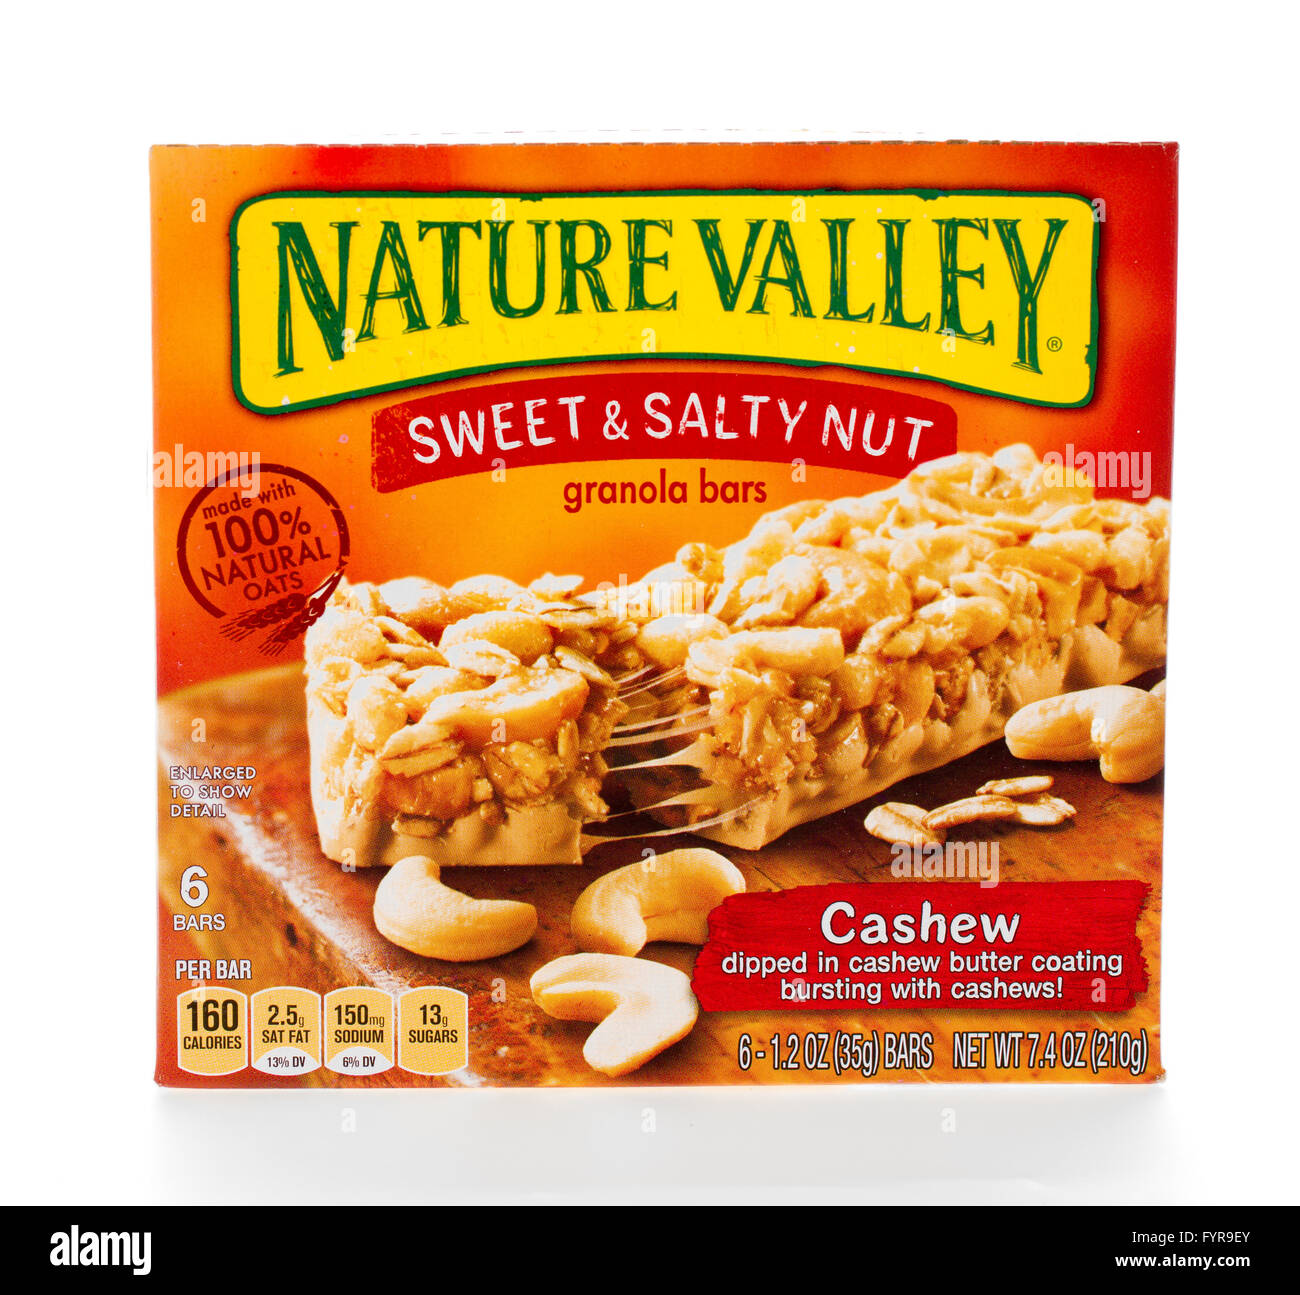 Nature Valley™ Protein Chewy Granola Bars Peanut Butter Dark Chocolate (16  ct) 1.42 oz